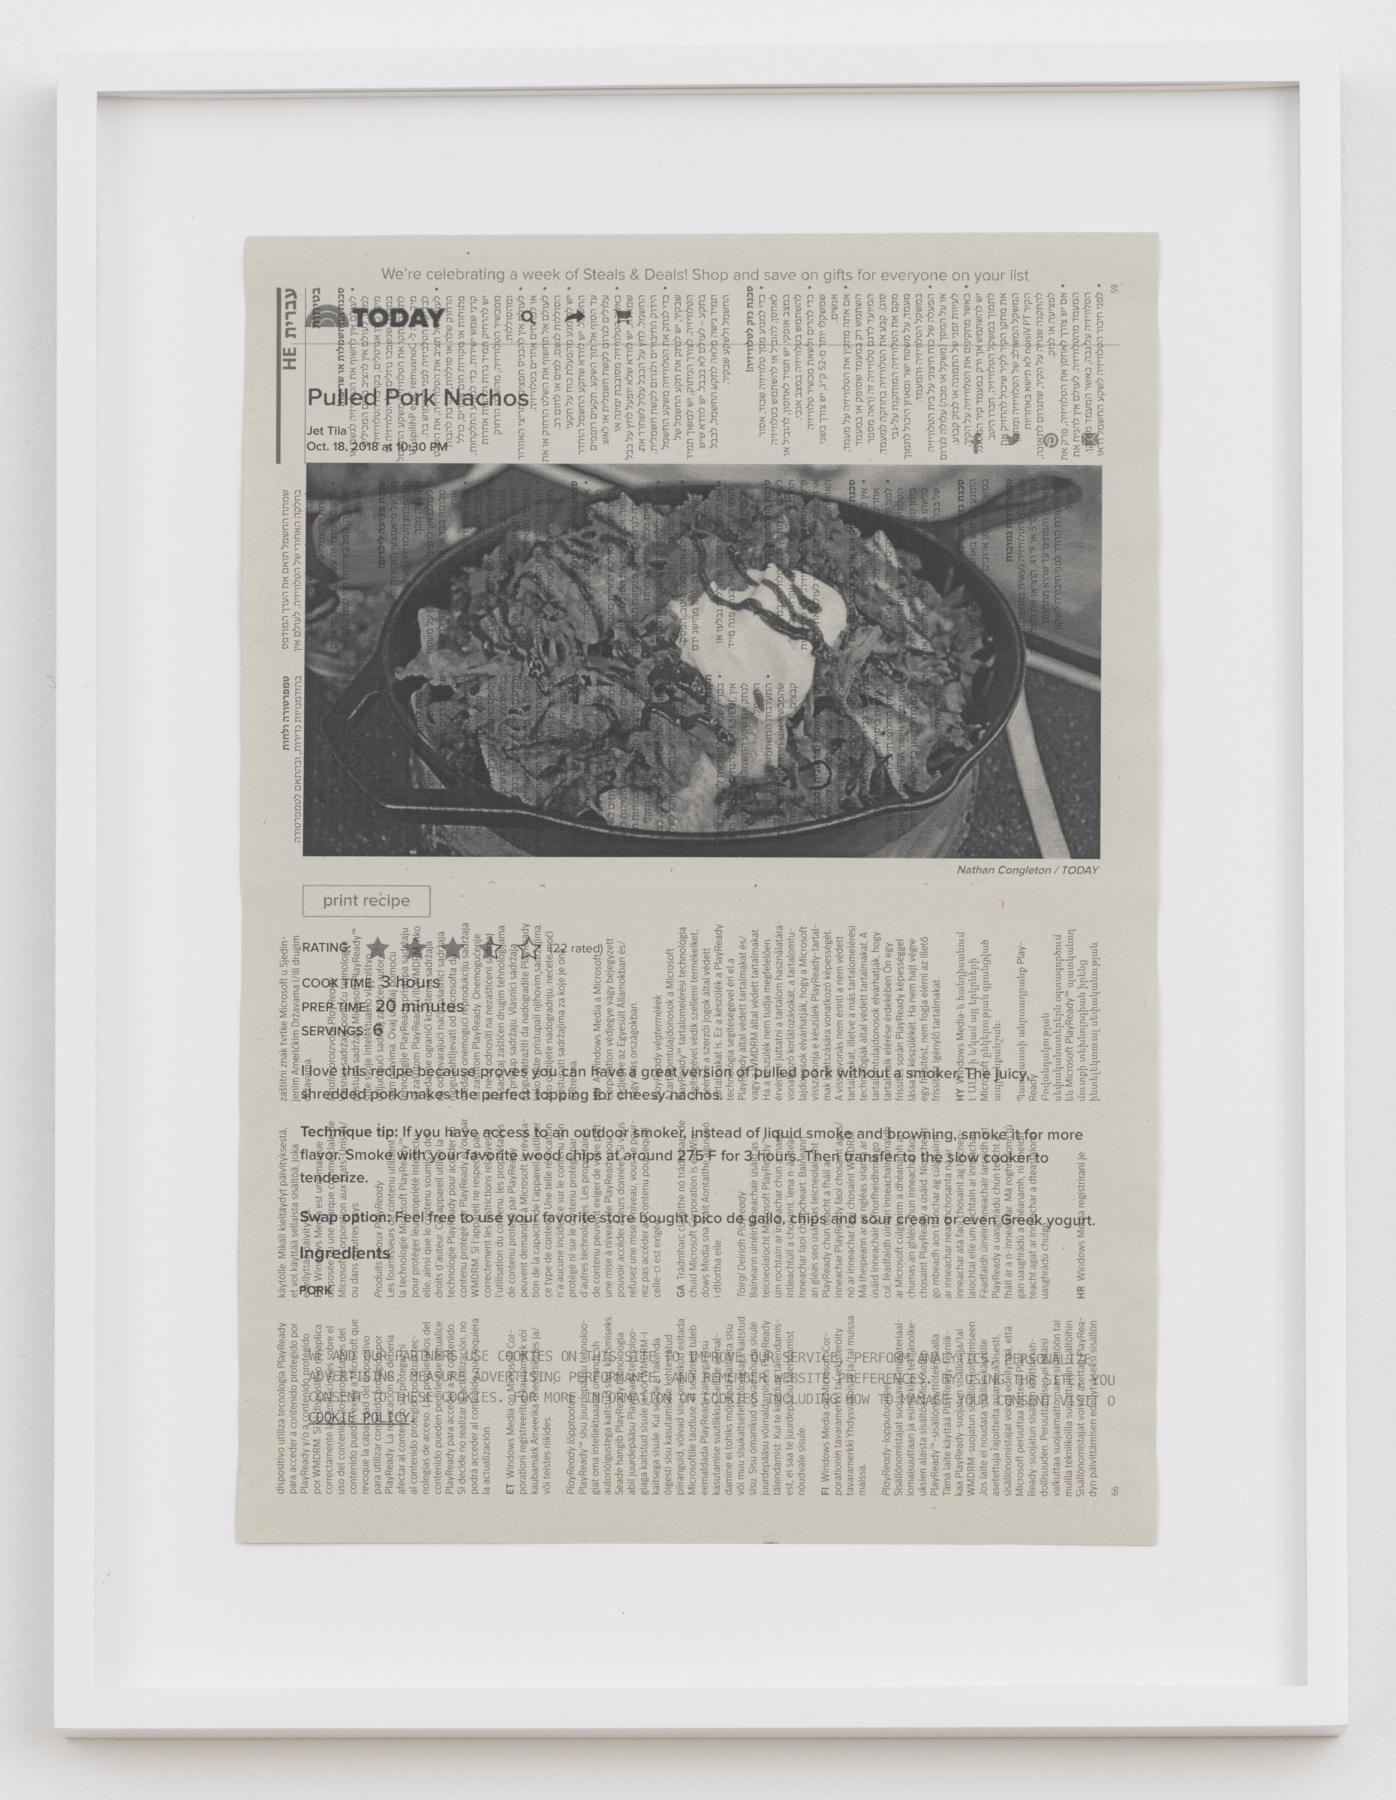 Cory Arcangel
TODAY: Pulled Pork Nachos, 2020
Hewlett packard home office Laserjet on found PHILIPS flatscreen LED technical manual page
Paper: 11 7/8 x 8 1/4 inches (30.2 x 21 cm)
Frame: 15 1/8 x 11 9/16 x 1 3/8 inches (38.4 x 29.4 x 3.5 cm)